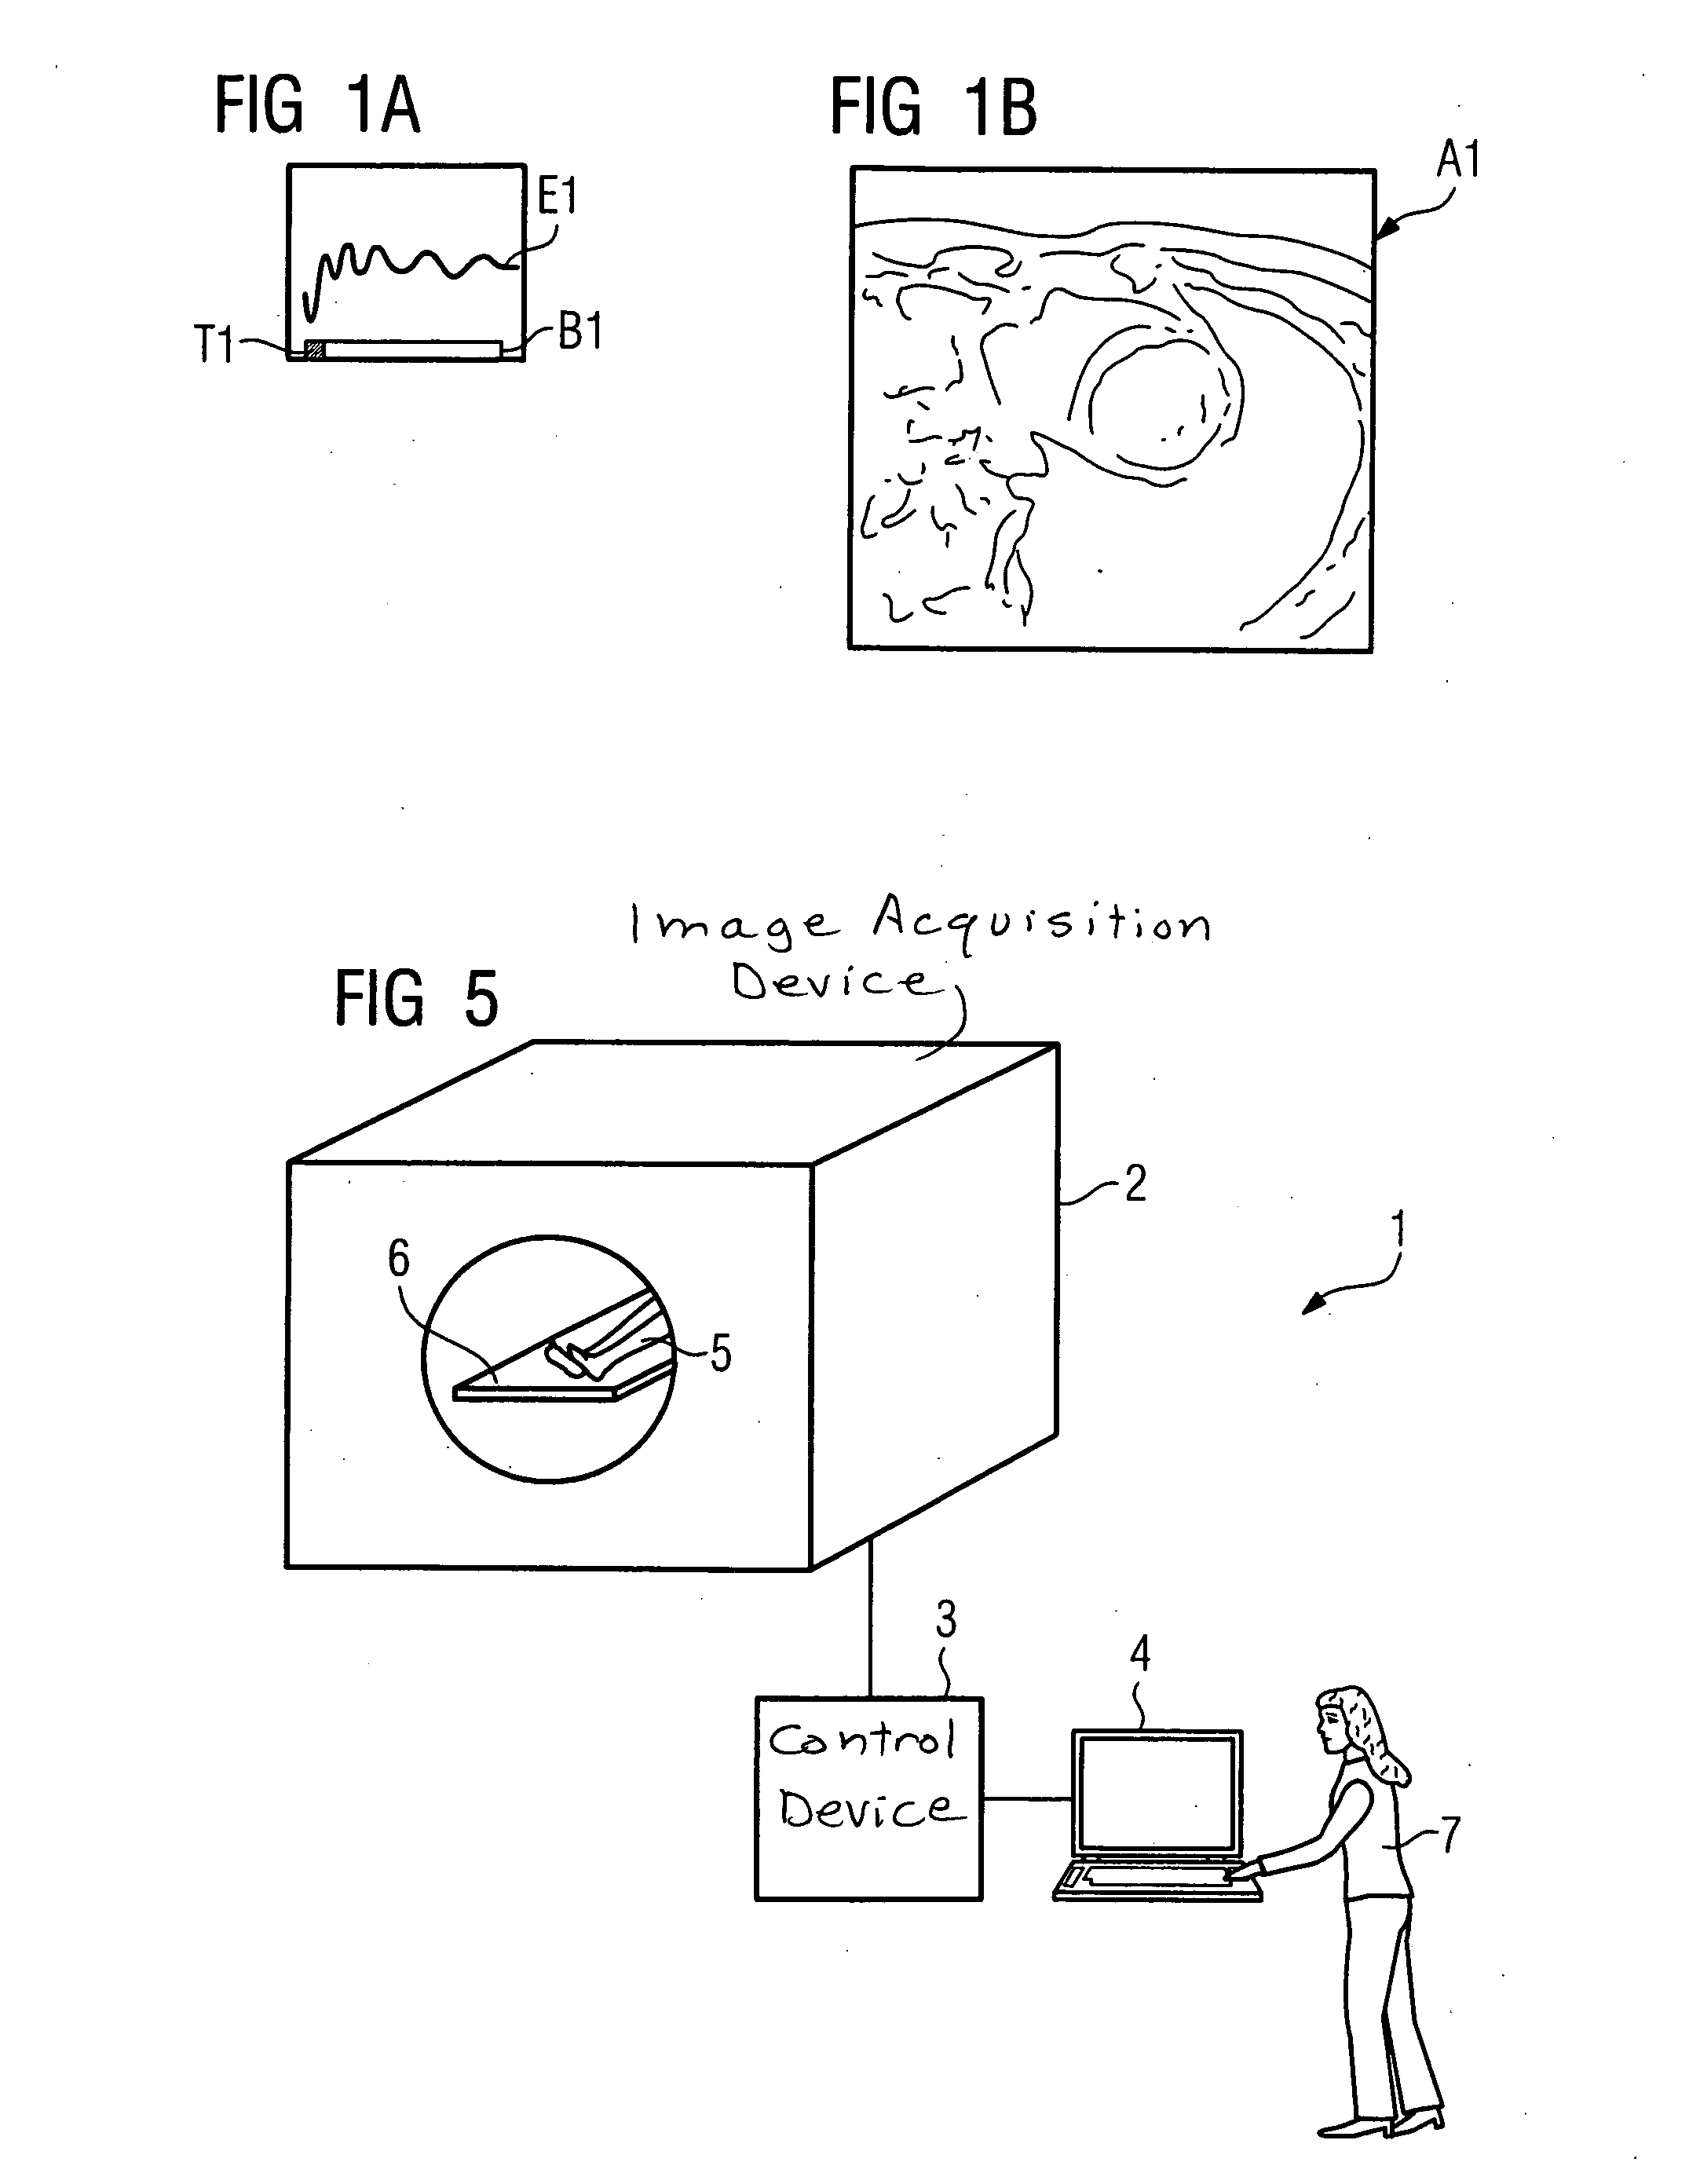 Method for generating an image exposure of the heart requiring a preparation